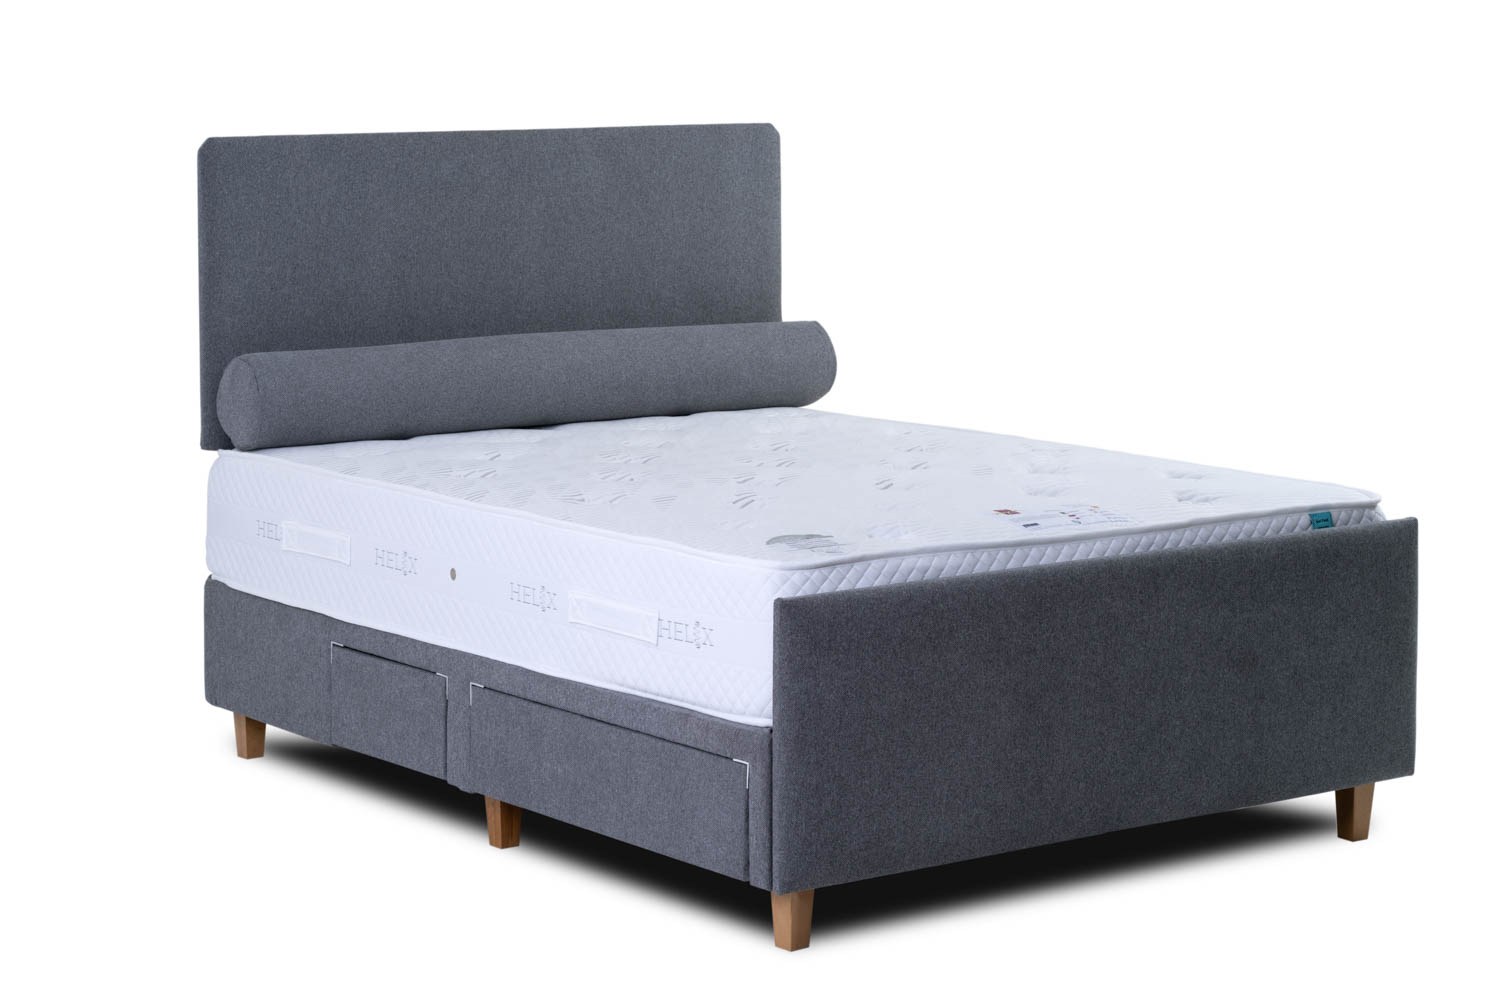 Best Beds Penzance Fabric Bed Frame